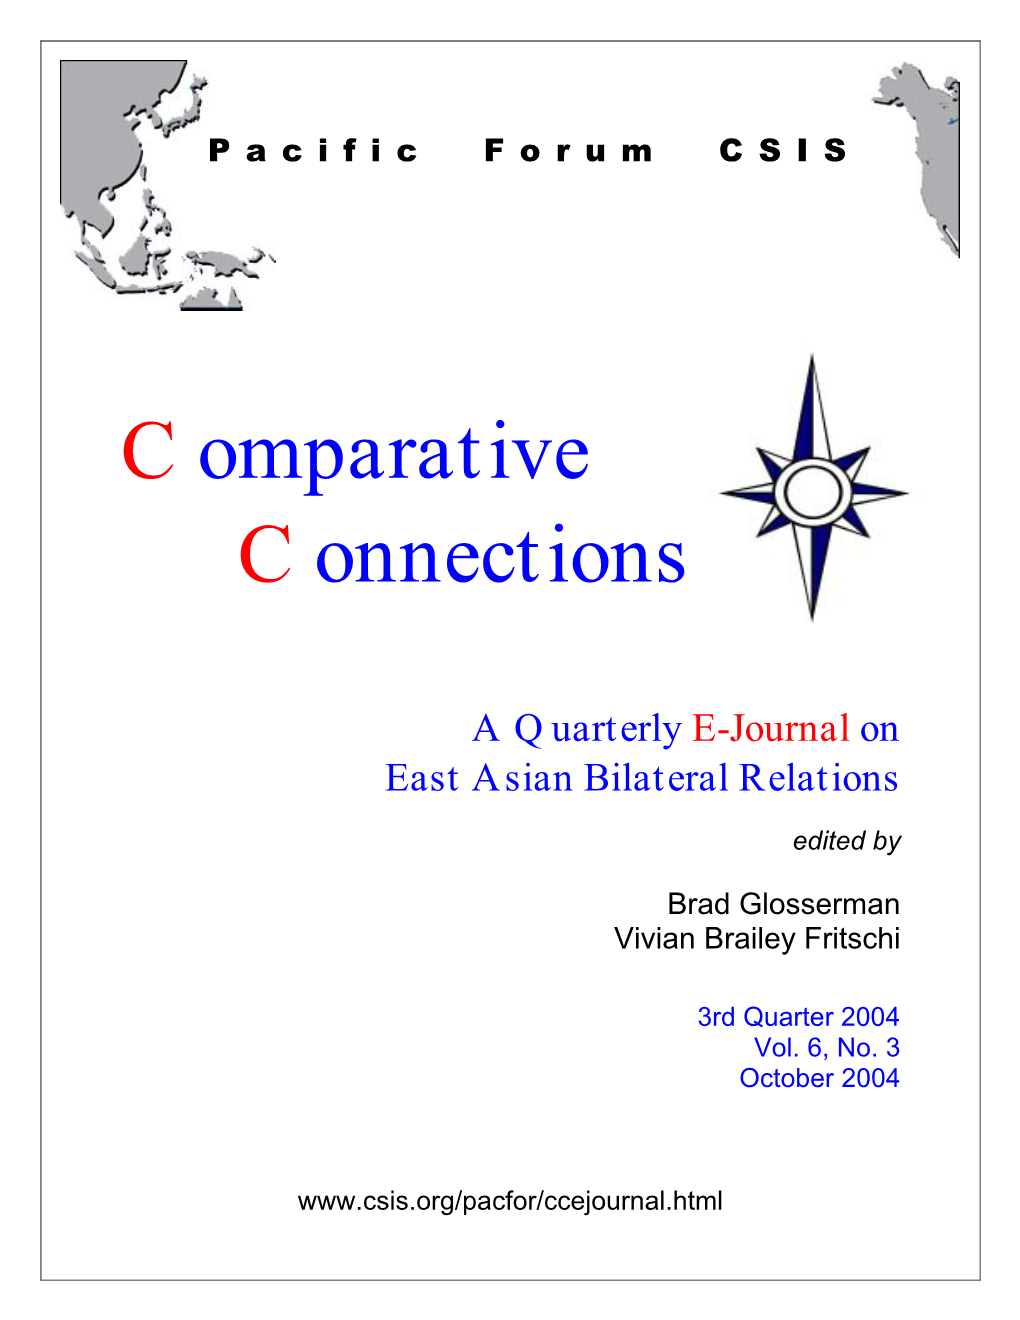 Comparative Connections, Volume 6, Number 3